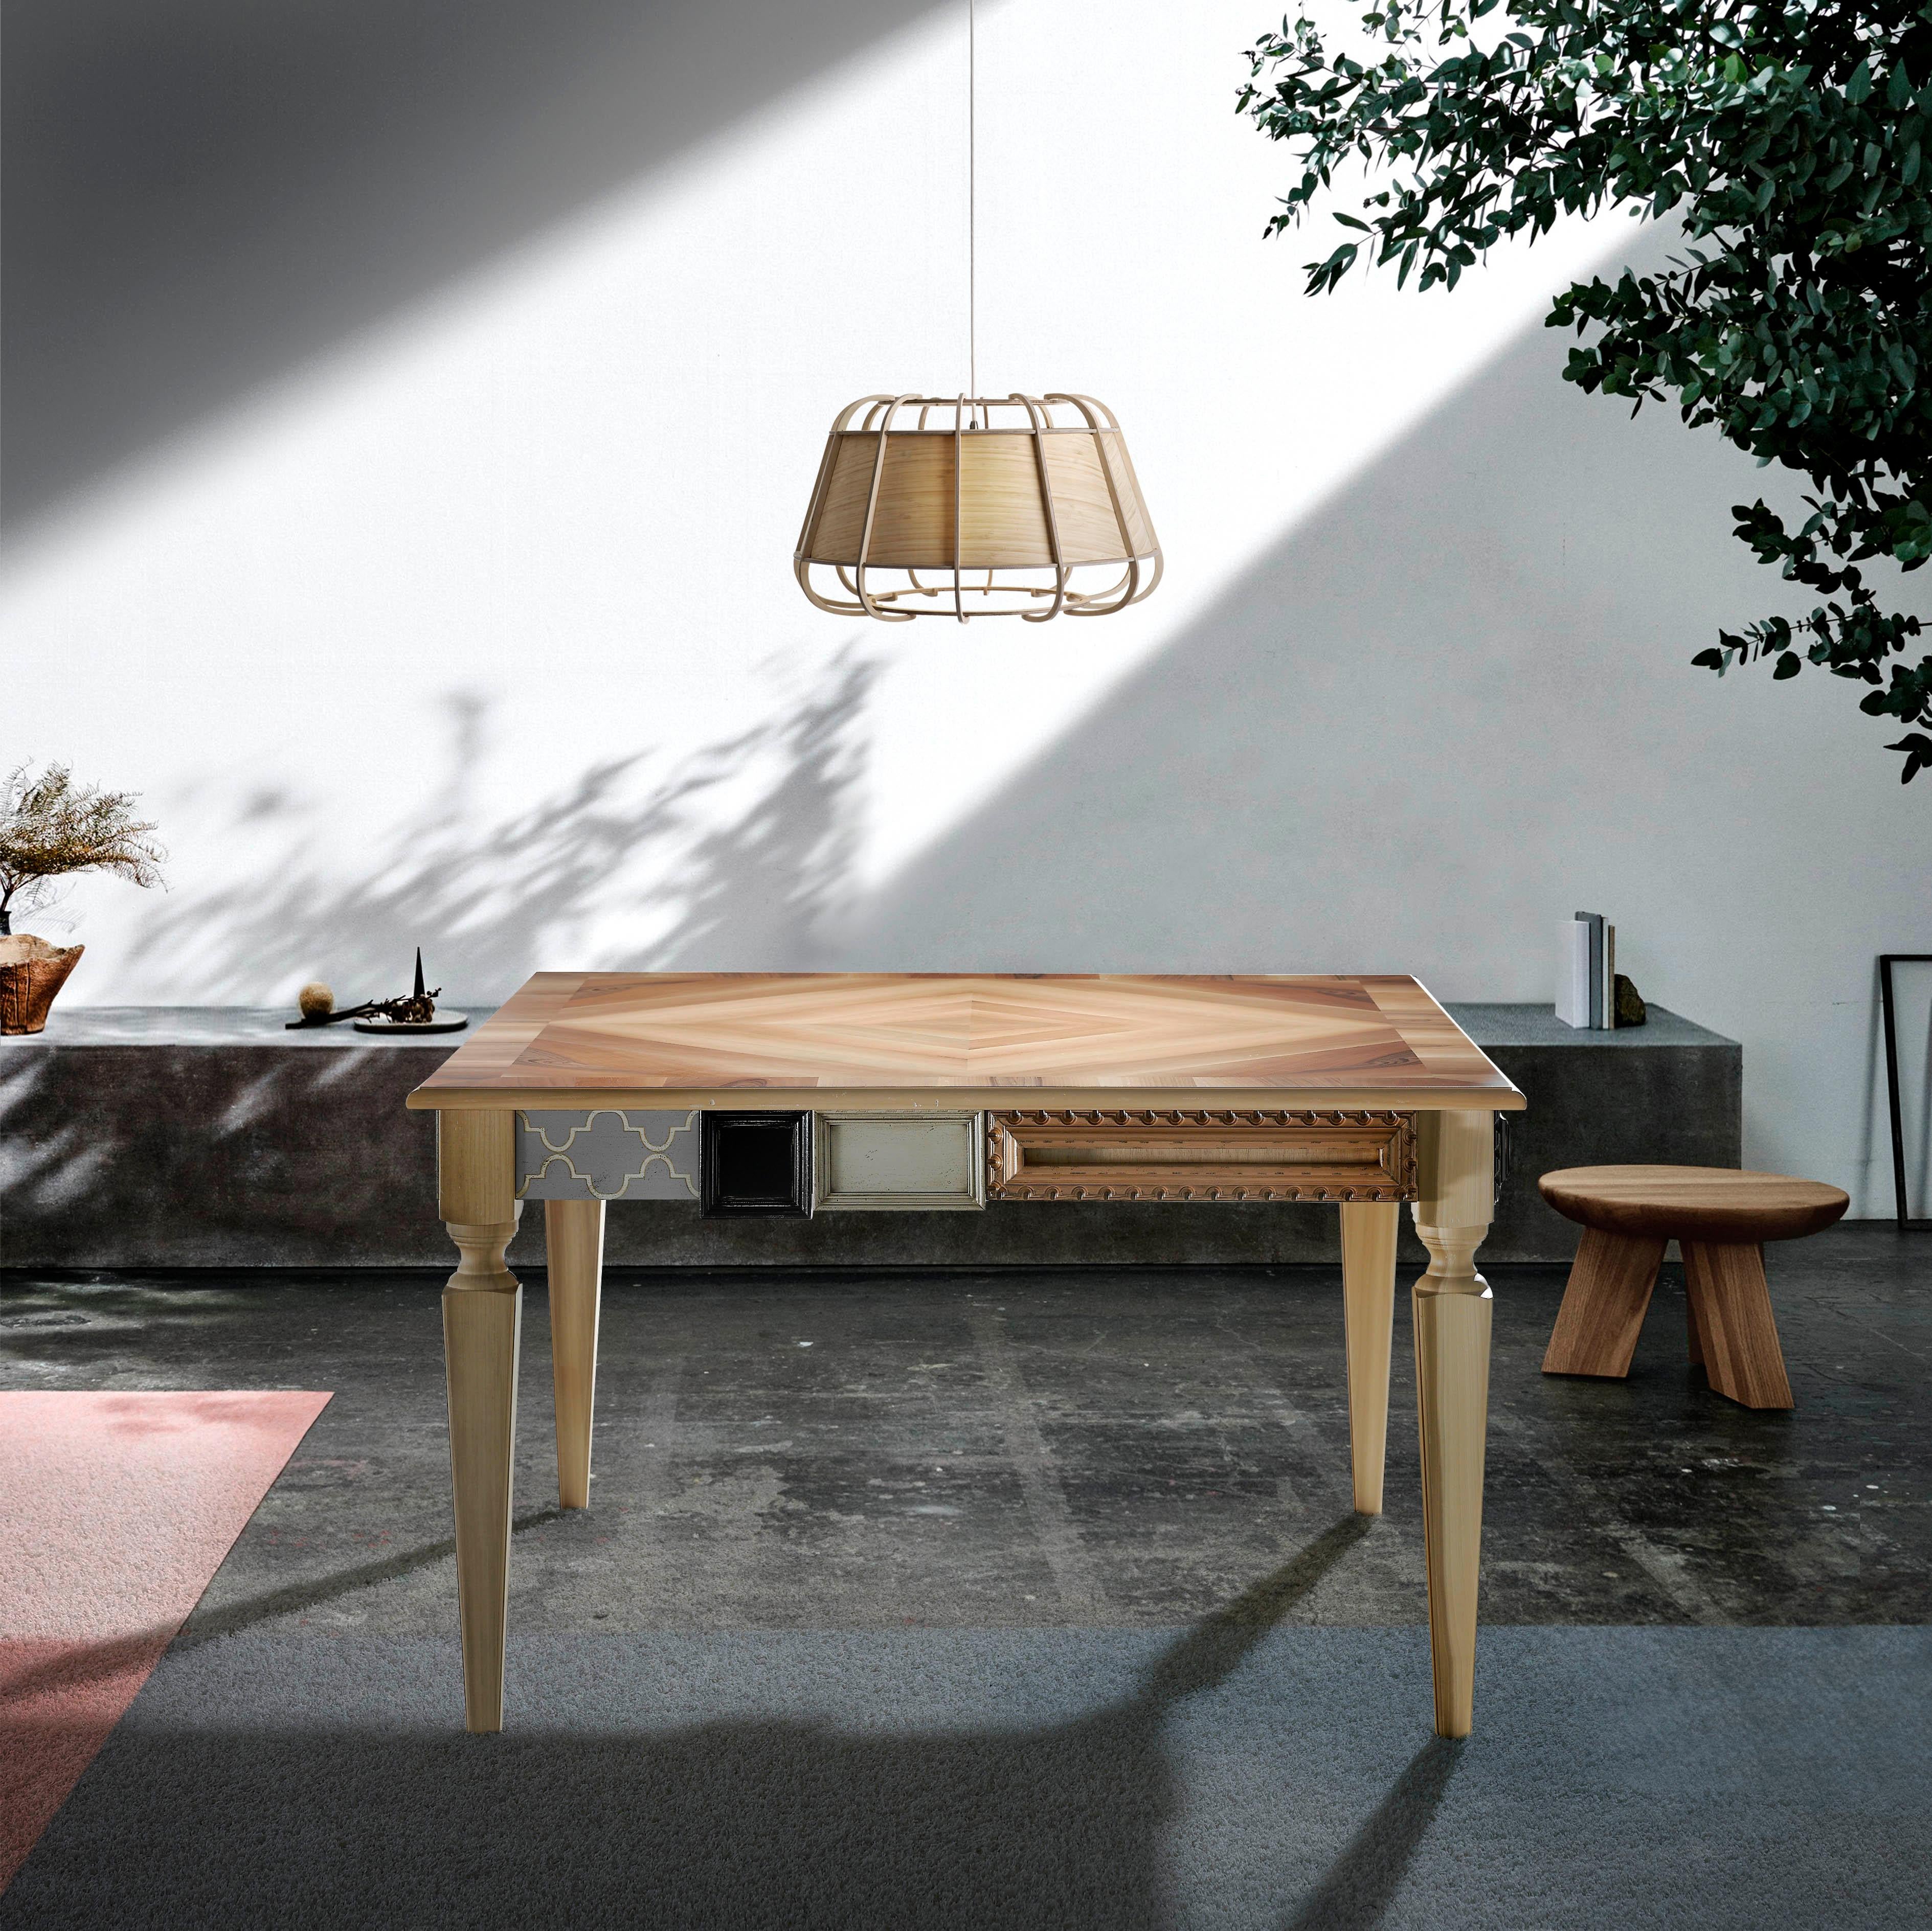 To design this extendable table, we internalized the historical concept of Arcadia as a utopian and idyllic place, whose original reference was the classical bucolic-pastoral world. A paradise alien to civilization, an imaginary country, a symbol of